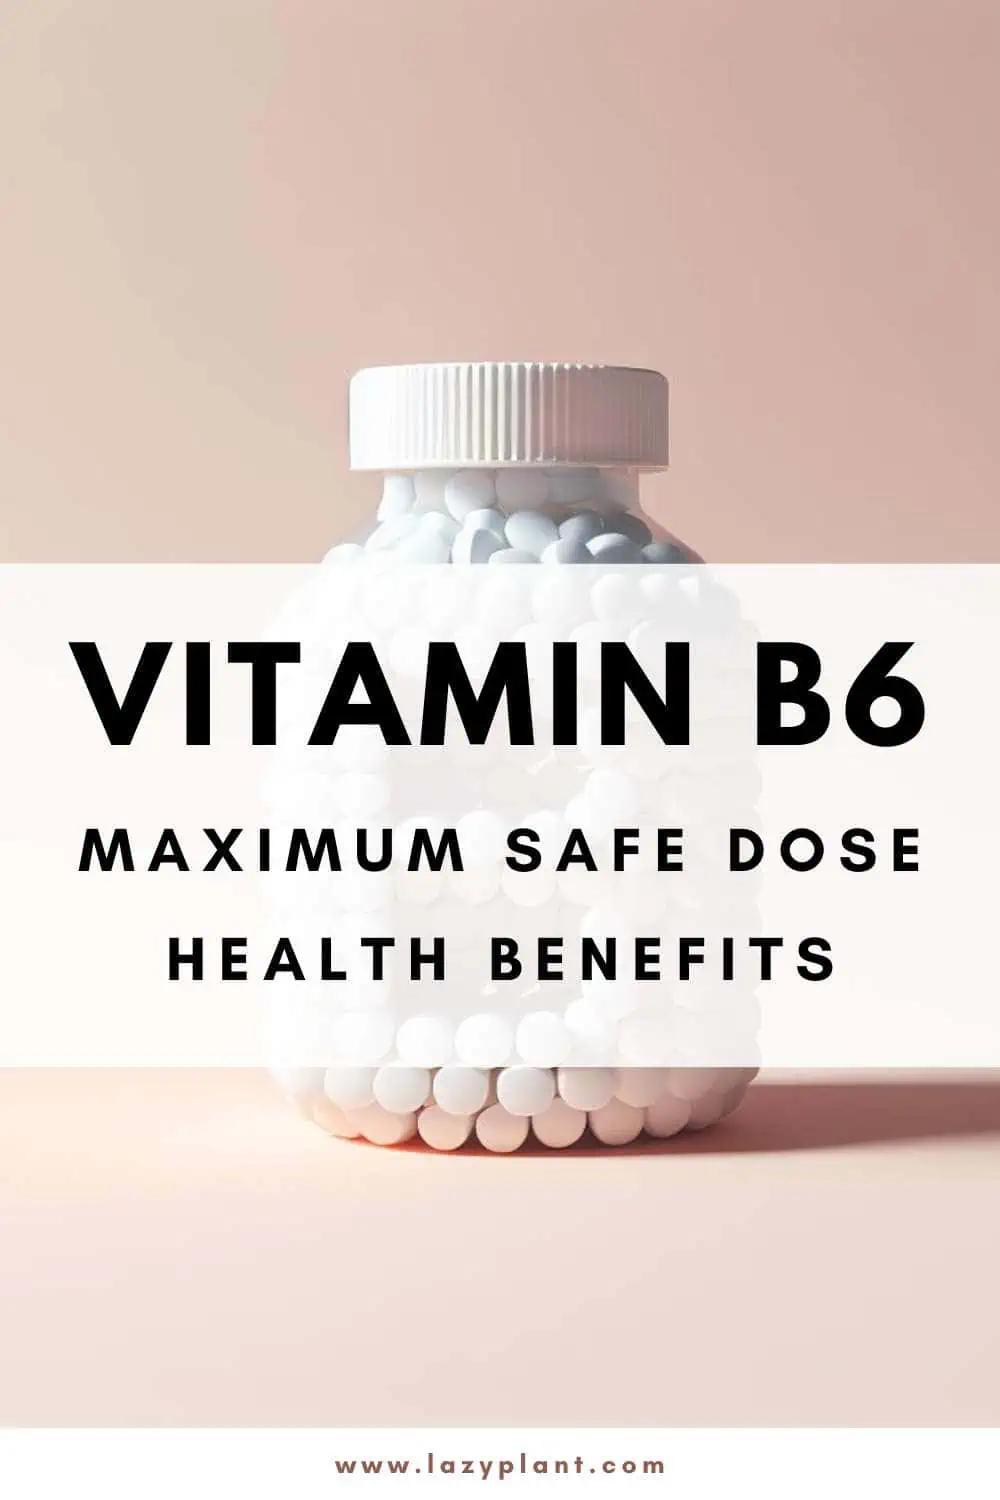 Health Tips: Vitamin B6 from food or supplements?